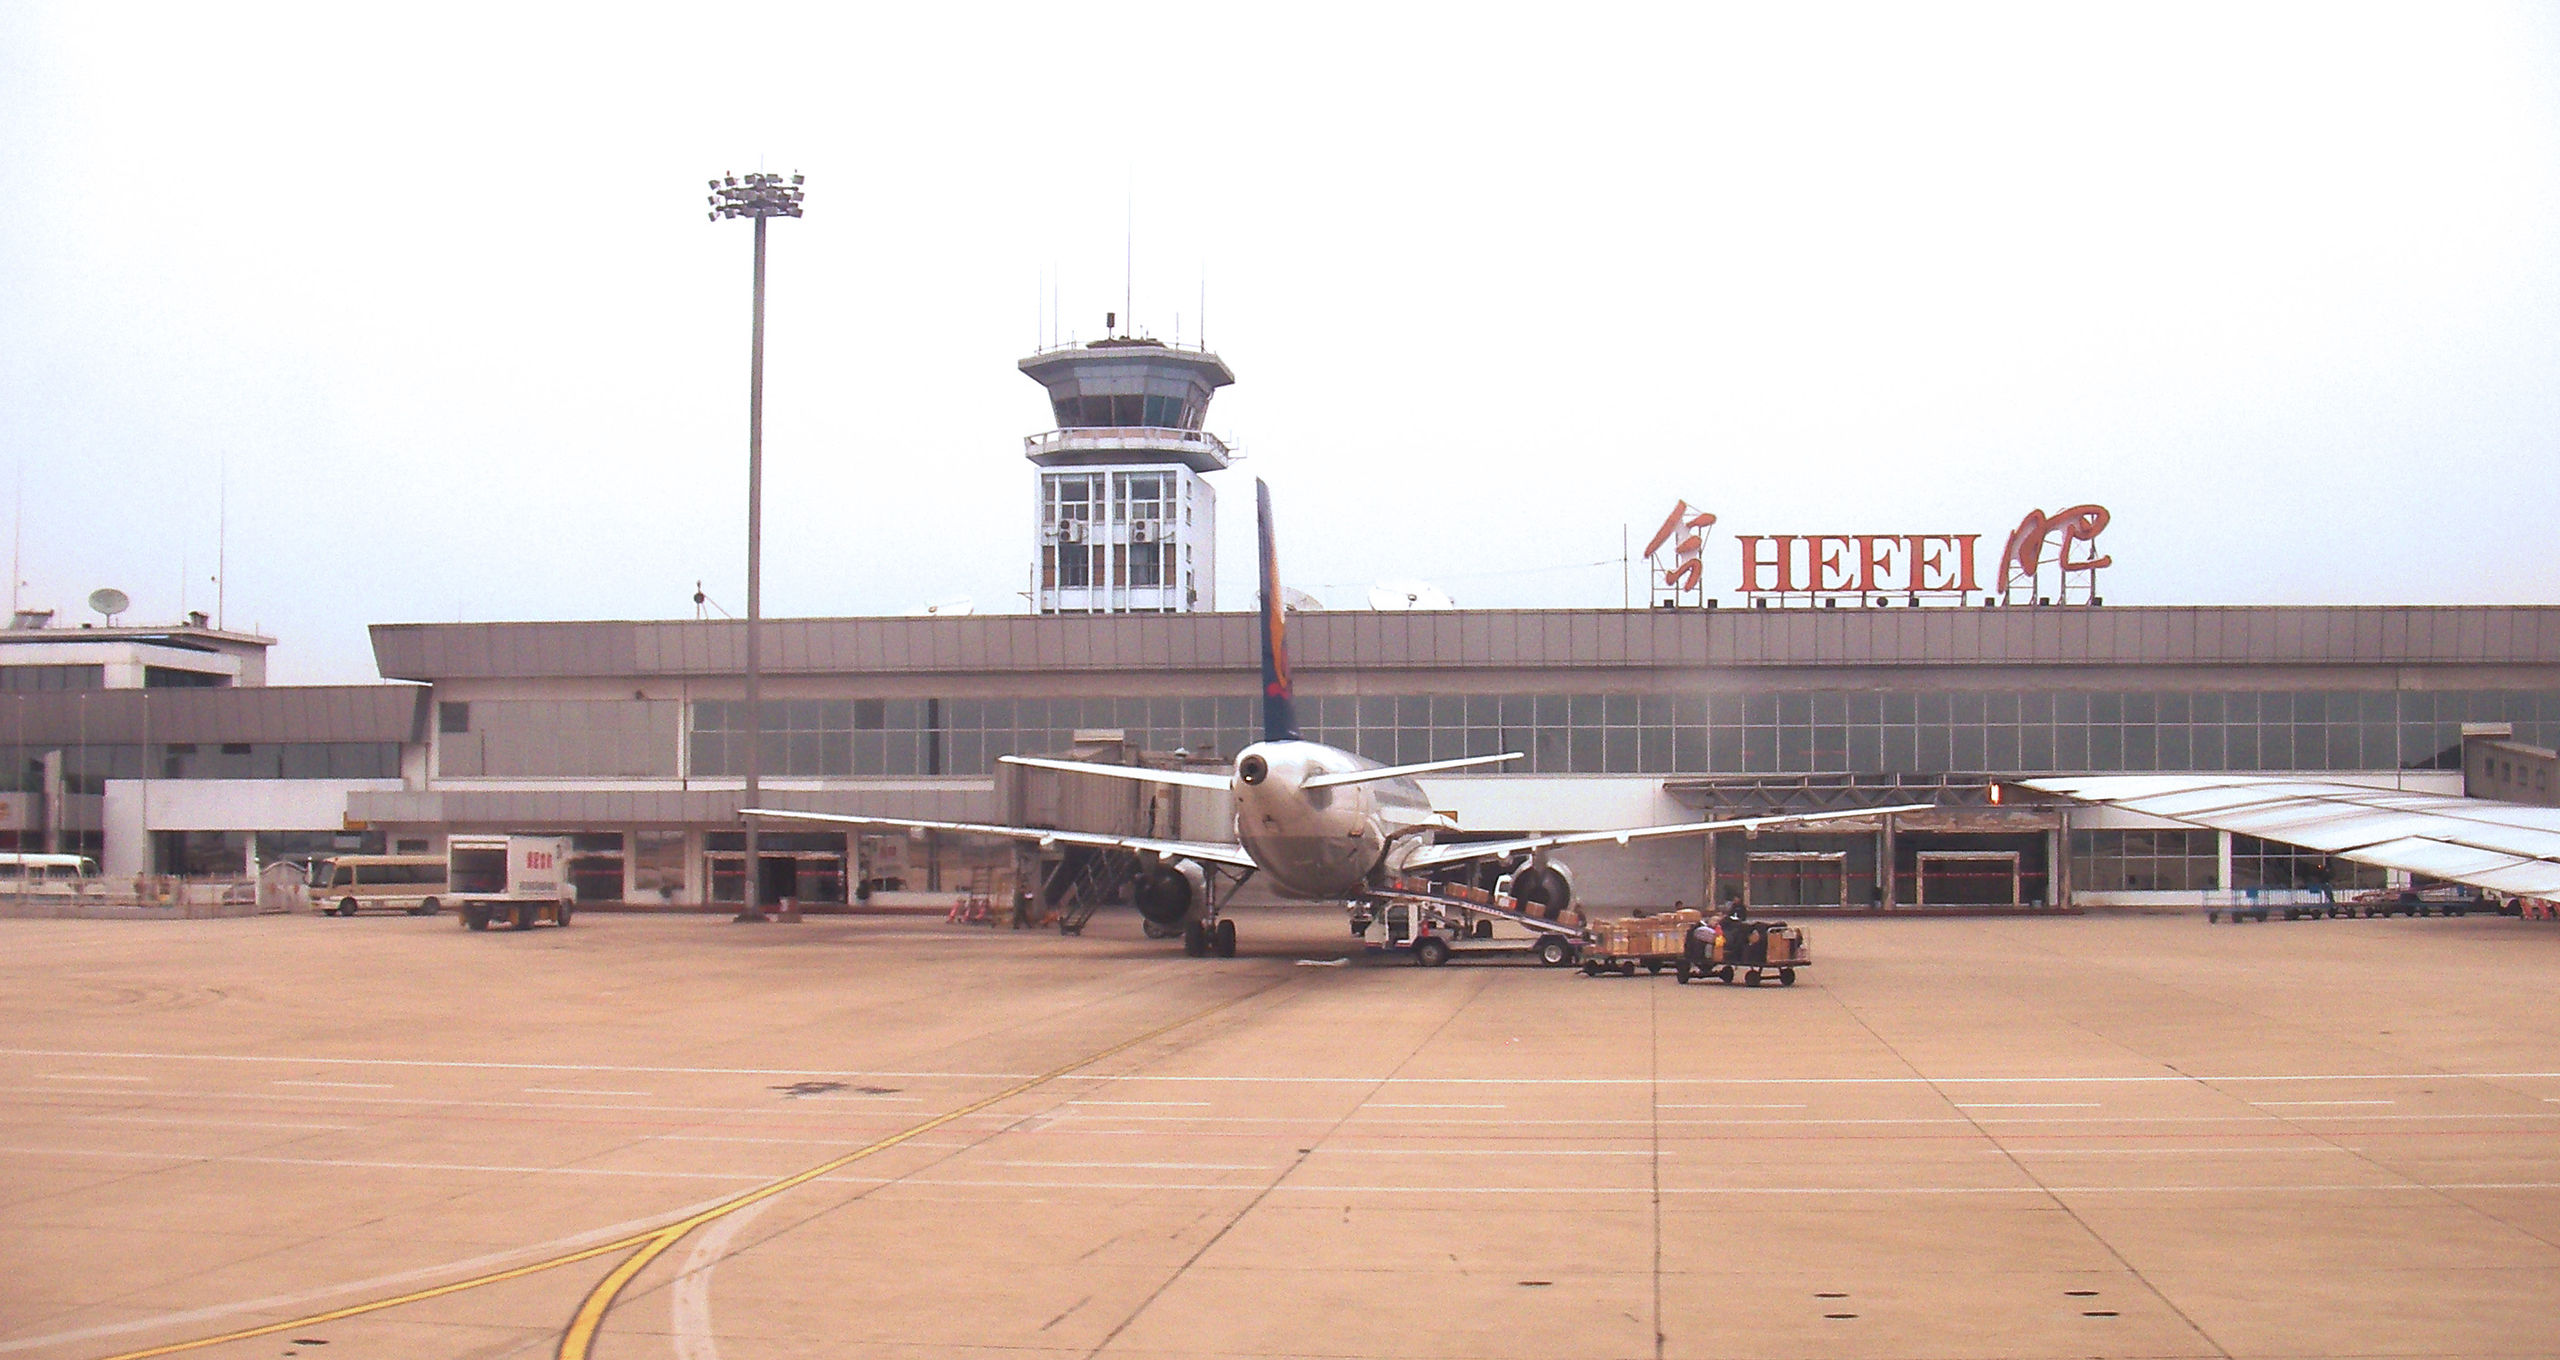 Hefei Airport replaced Luogang Airport as the main airport in Hefei.